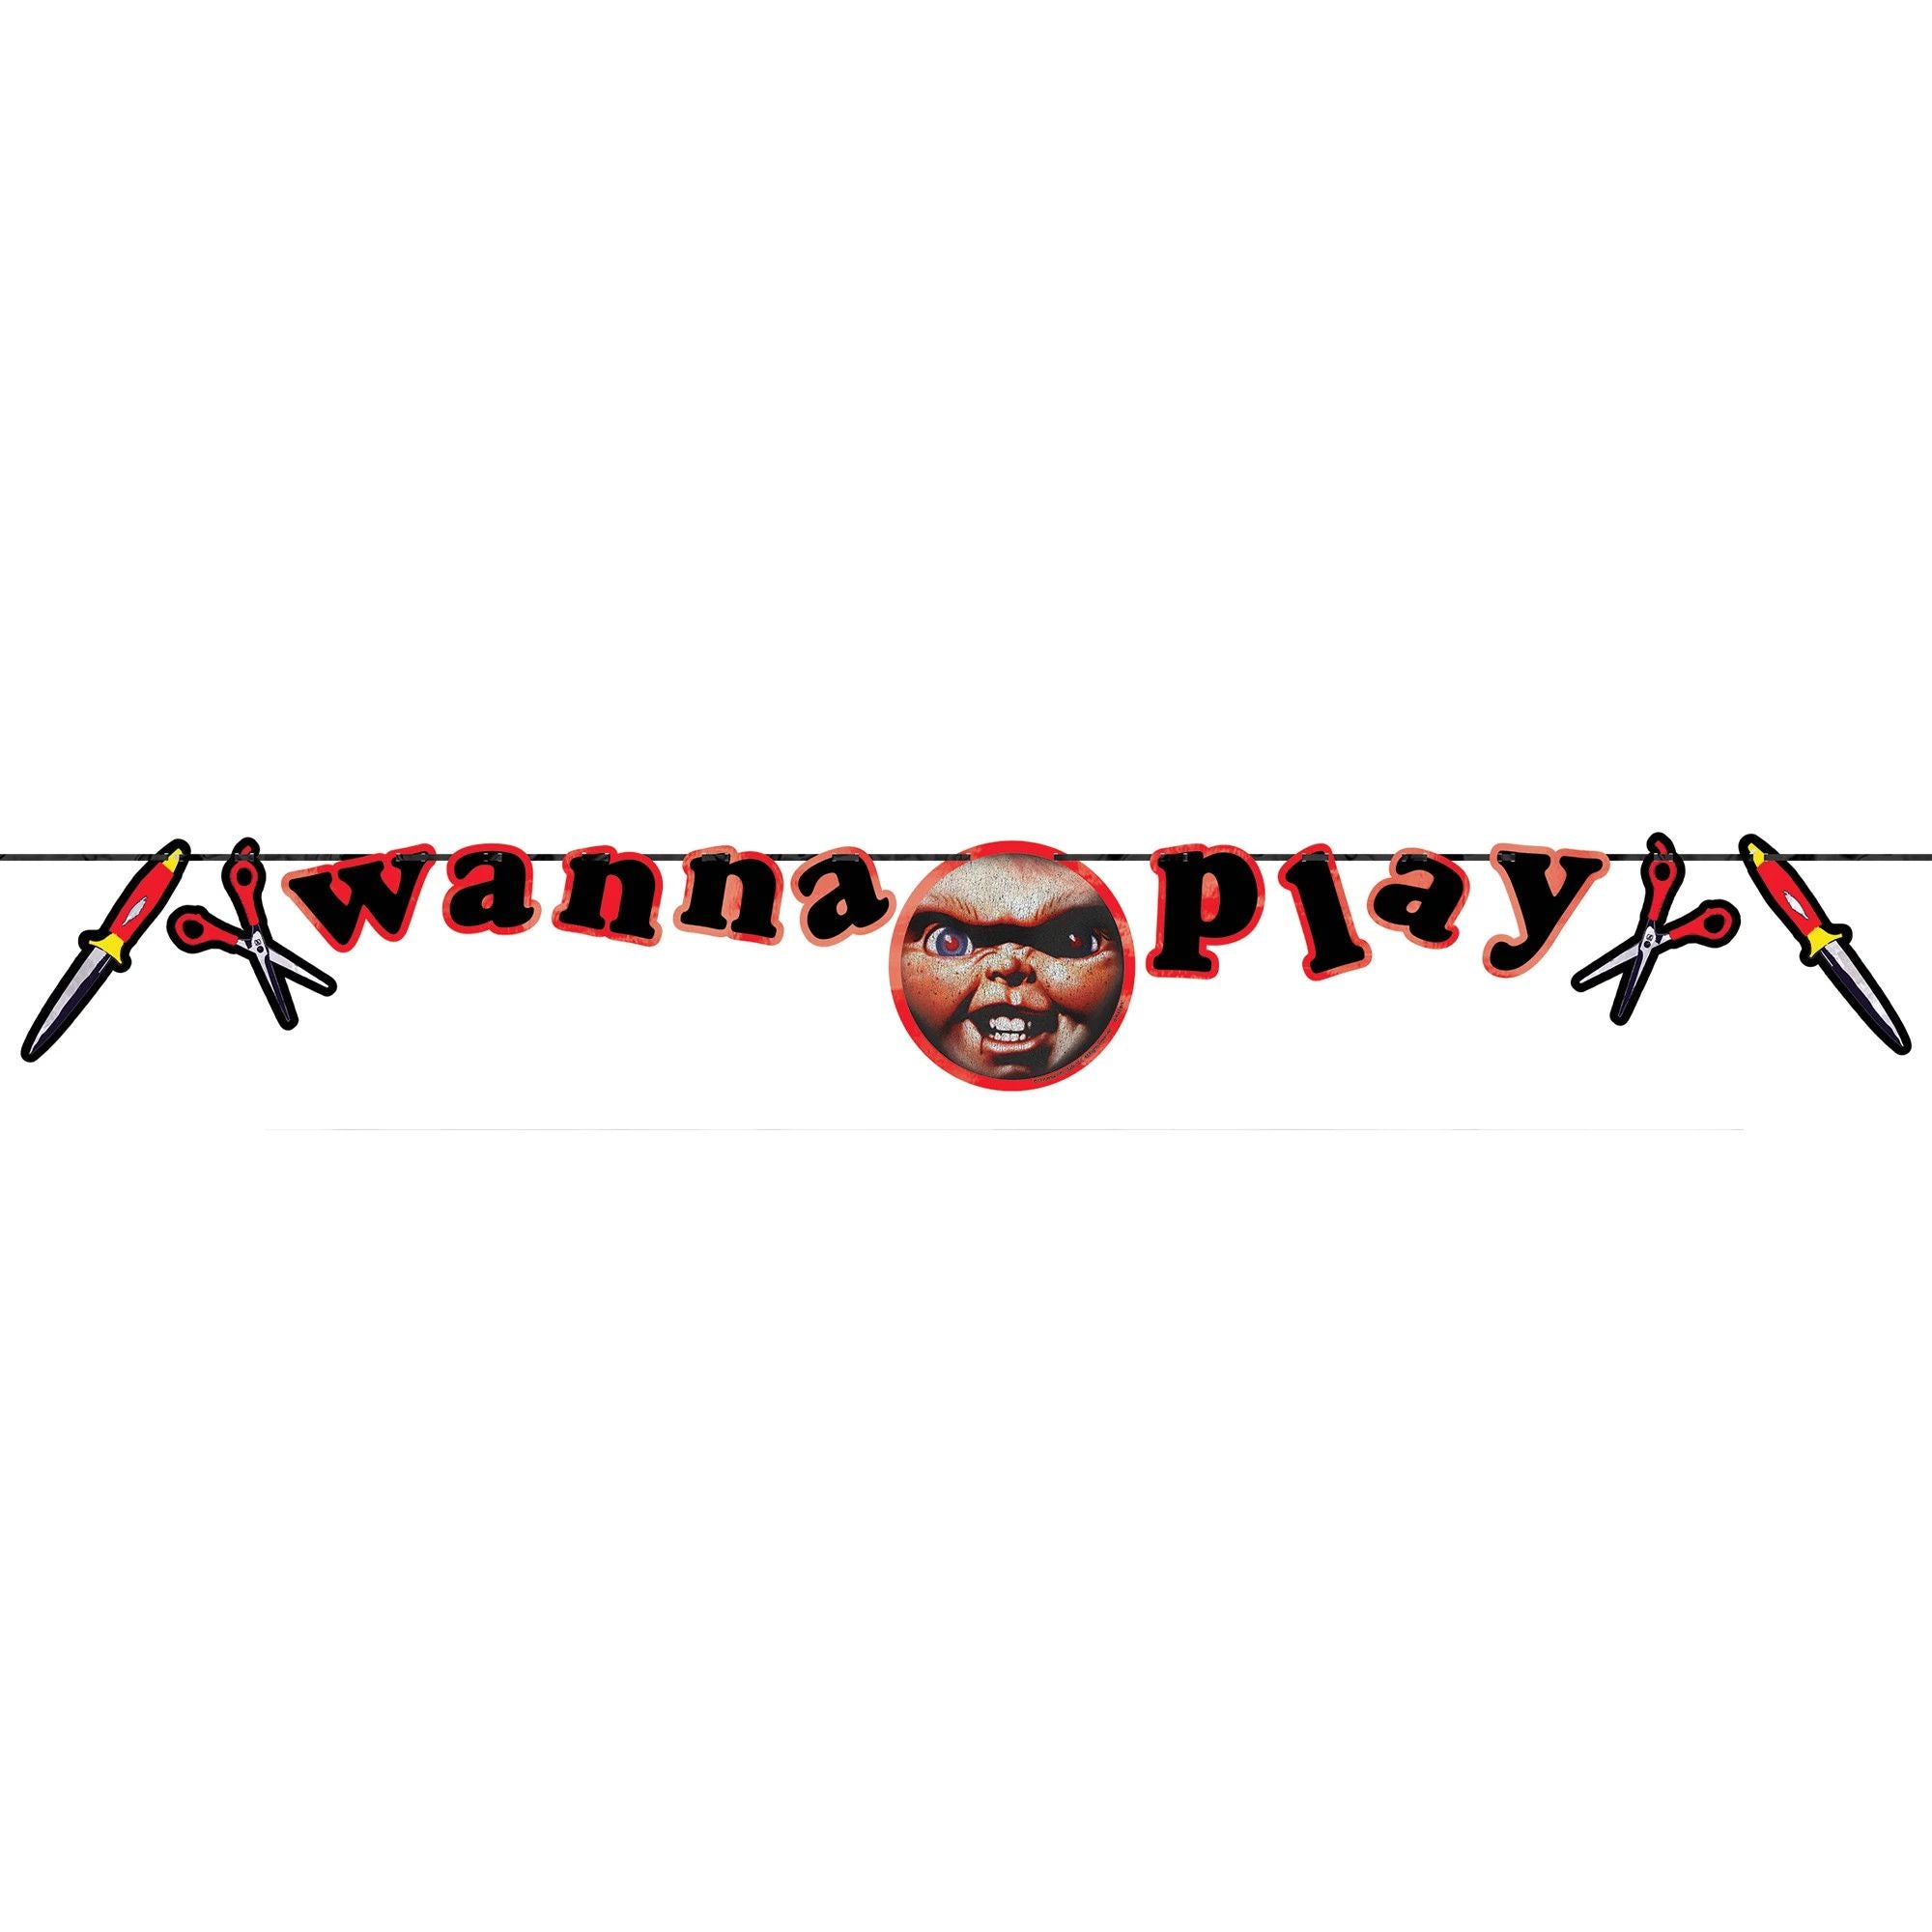 Child's Play Chucky Banner